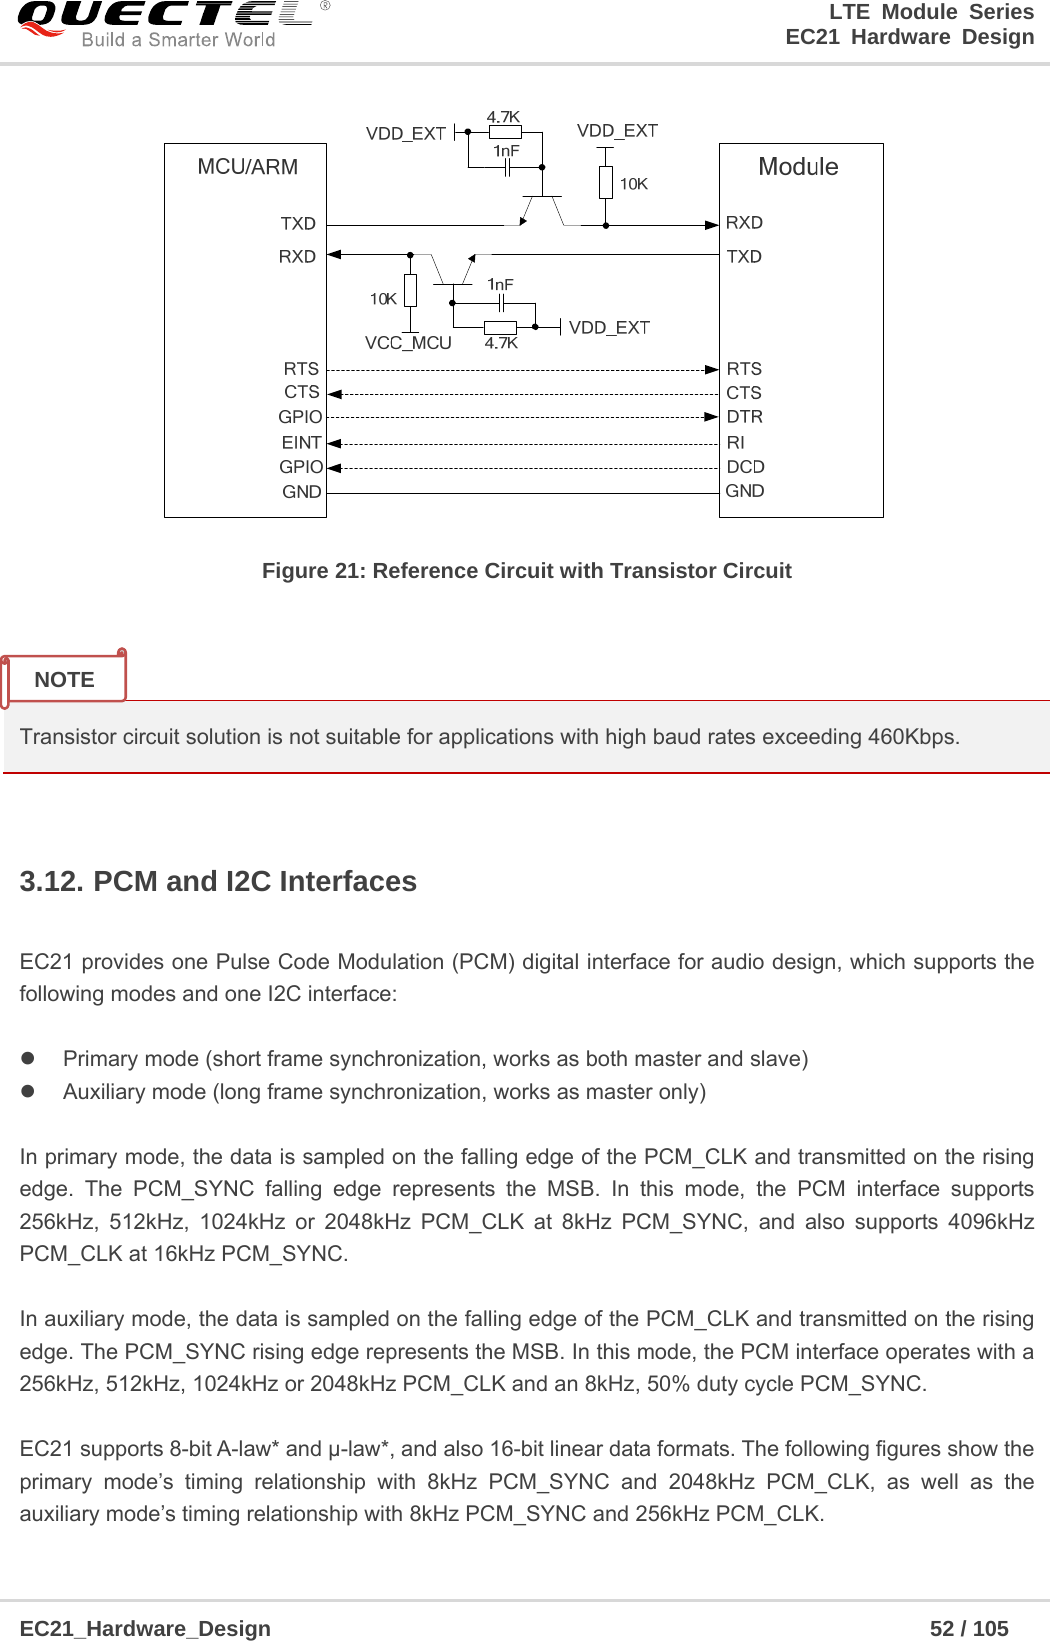                                                                        LTE Module Series                                                                 EC21 Hardware Design  EC21_Hardware_Design                                                            52 / 105     Figure 21: Reference Circuit with Transistor Circuit   Transistor circuit solution is not suitable for applications with high baud rates exceeding 460Kbps.  3.12. PCM and I2C Interfaces  EC21 provides one Pulse Code Modulation (PCM) digital interface for audio design, which supports the following modes and one I2C interface:    Primary mode (short frame synchronization, works as both master and slave)   Auxiliary mode (long frame synchronization, works as master only)  In primary mode, the data is sampled on the falling edge of the PCM_CLK and transmitted on the rising edge. The PCM_SYNC falling edge represents the MSB. In this mode, the PCM interface supports 256kHz, 512kHz, 1024kHz or 2048kHz PCM_CLK at 8kHz PCM_SYNC, and also supports 4096kHz PCM_CLK at 16kHz PCM_SYNC.  In auxiliary mode, the data is sampled on the falling edge of the PCM_CLK and transmitted on the rising edge. The PCM_SYNC rising edge represents the MSB. In this mode, the PCM interface operates with a 256kHz, 512kHz, 1024kHz or 2048kHz PCM_CLK and an 8kHz, 50% duty cycle PCM_SYNC.   EC21 supports 8-bit A-law* and μ-law*, and also 16-bit linear data formats. The following figures show the primary mode’s timing relationship with 8kHz PCM_SYNC and 2048kHz PCM_CLK, as well as the auxiliary mode’s timing relationship with 8kHz PCM_SYNC and 256kHz PCM_CLK.   NOTE 